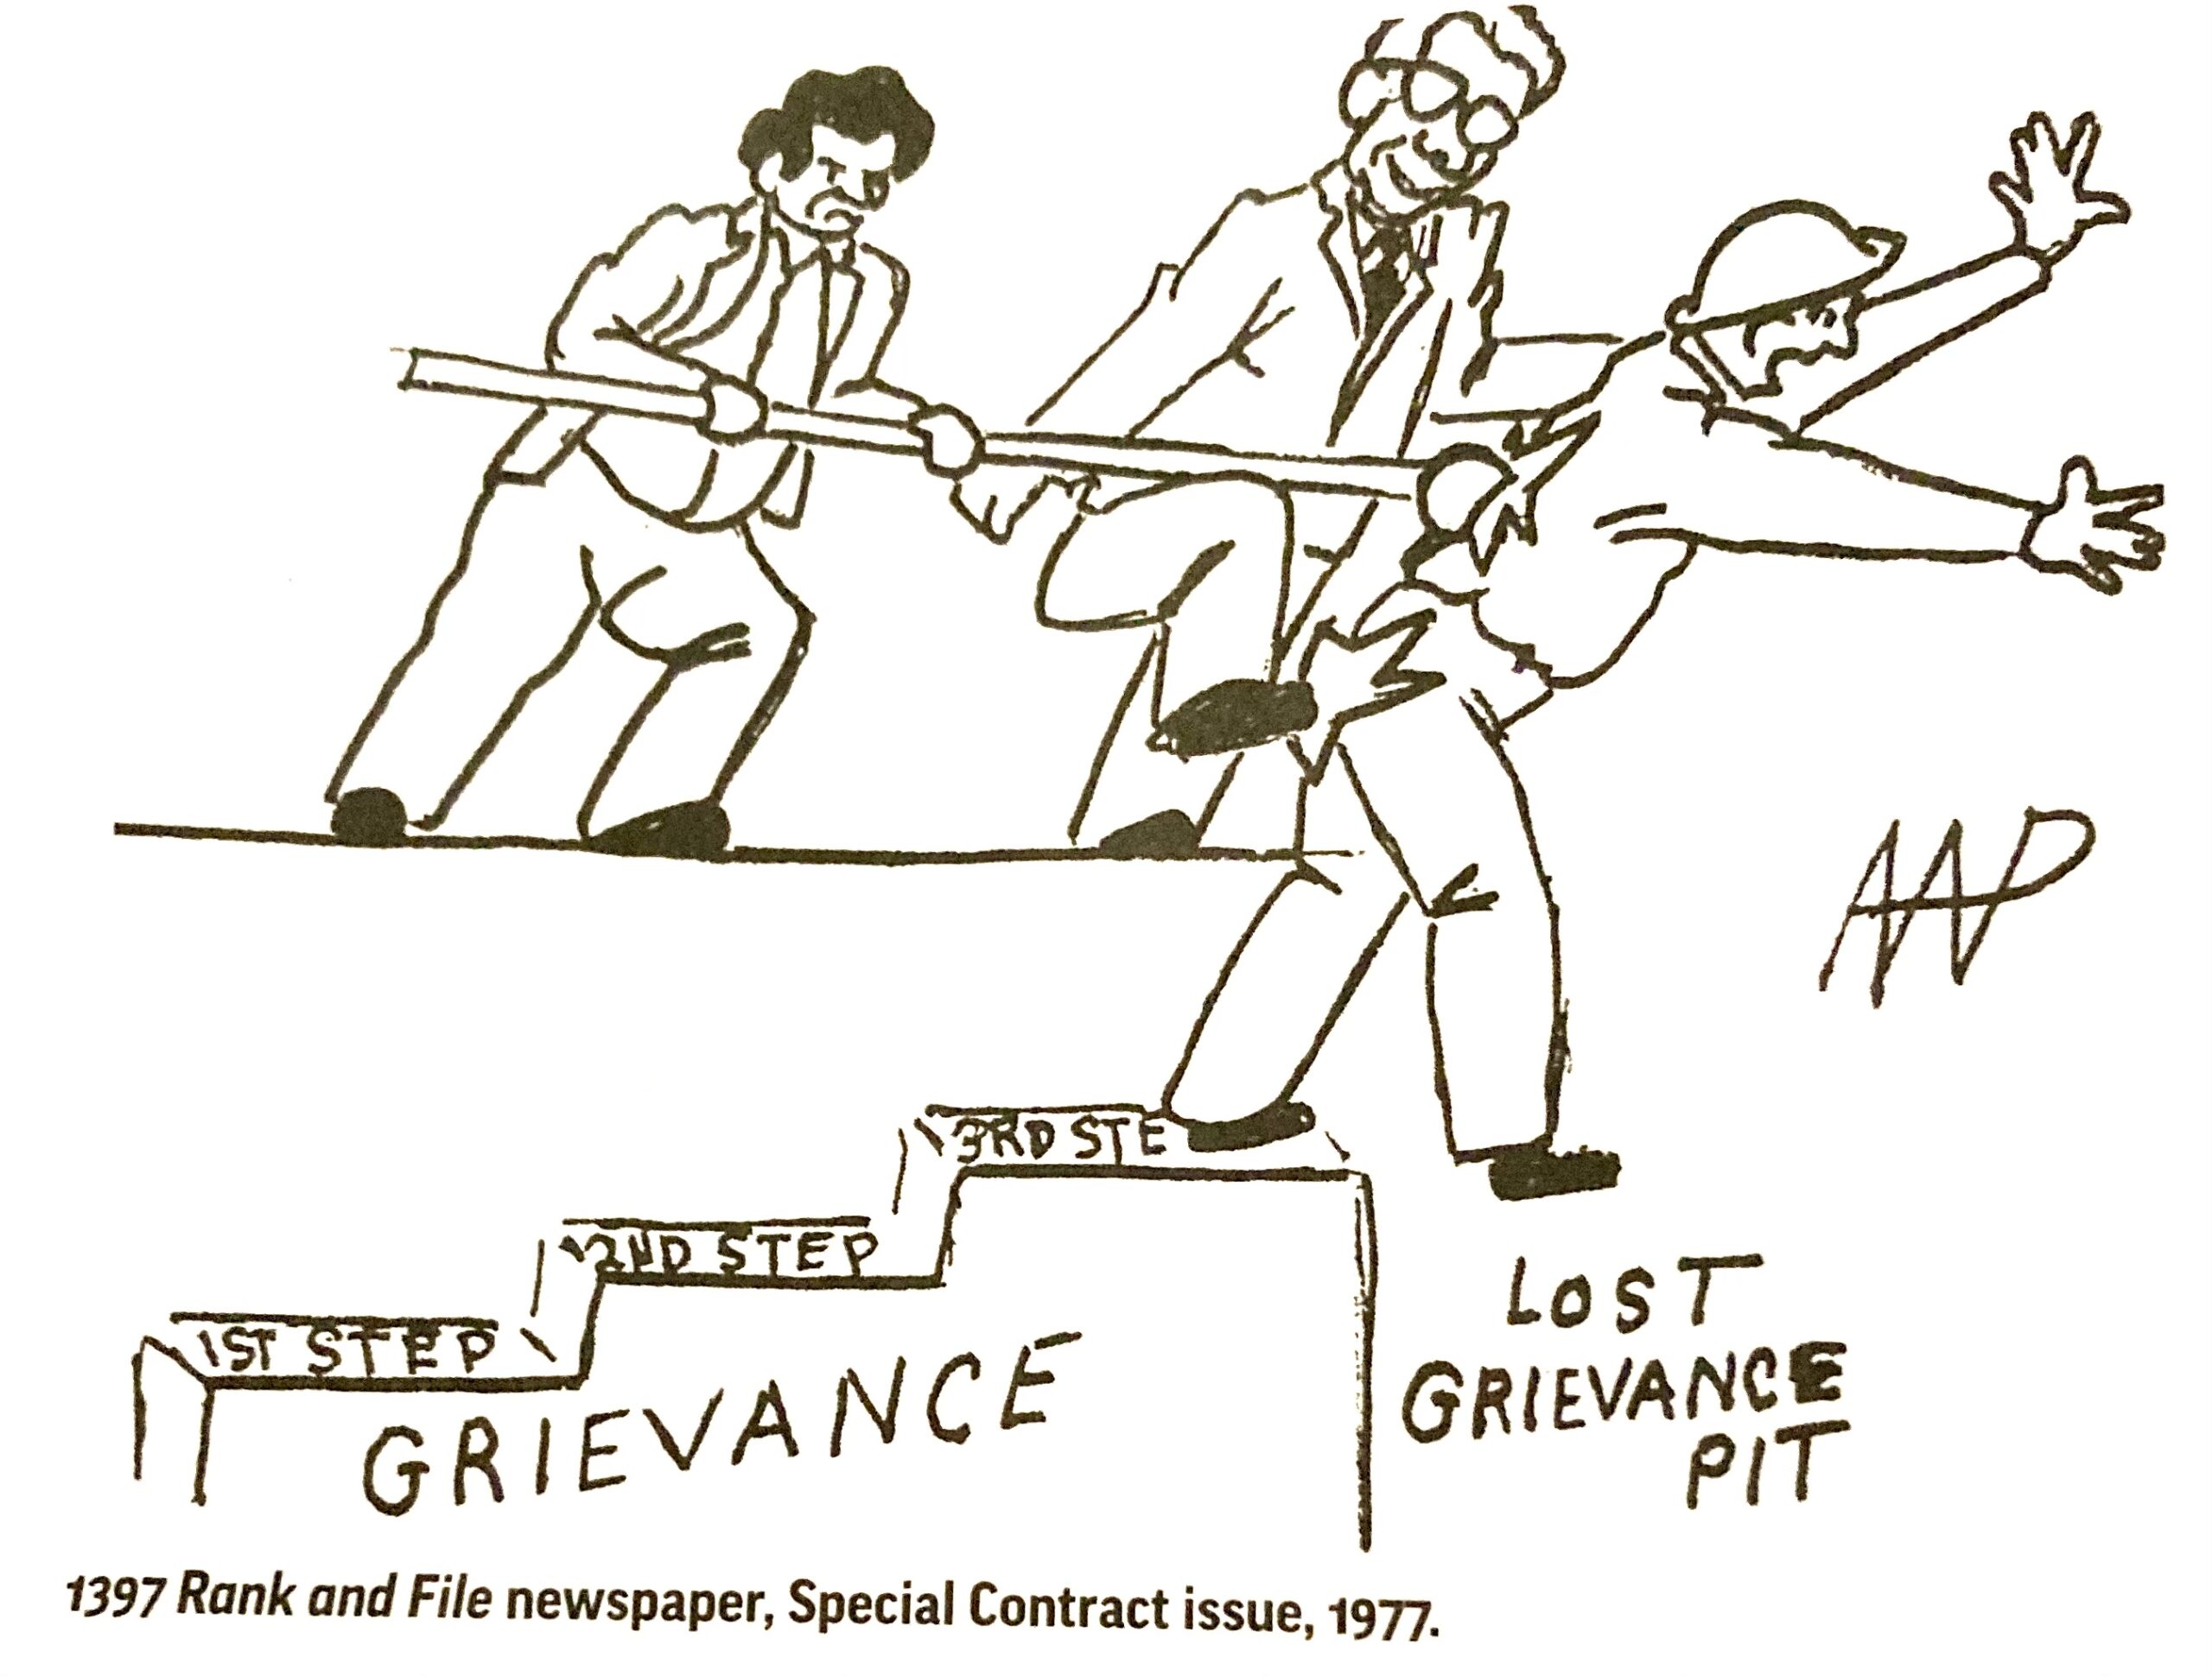 A political cartoon shows two men in suits pushing a steelworker off a third step symbolizing the ineffective grievance system that never seemed to resolve their issues.